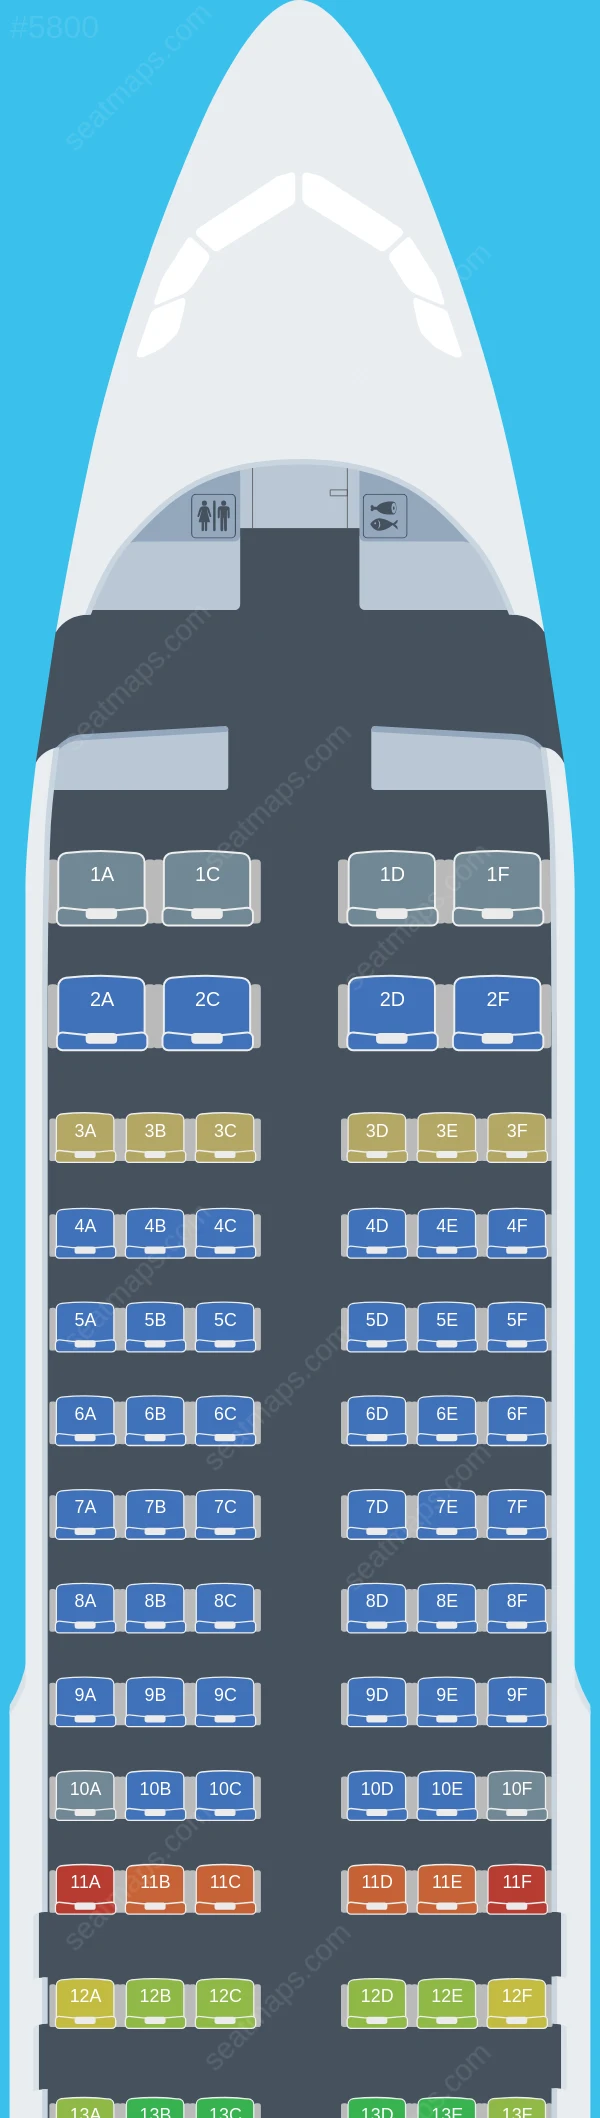 Spirit Airlines Airbus A320neo seatmap preview